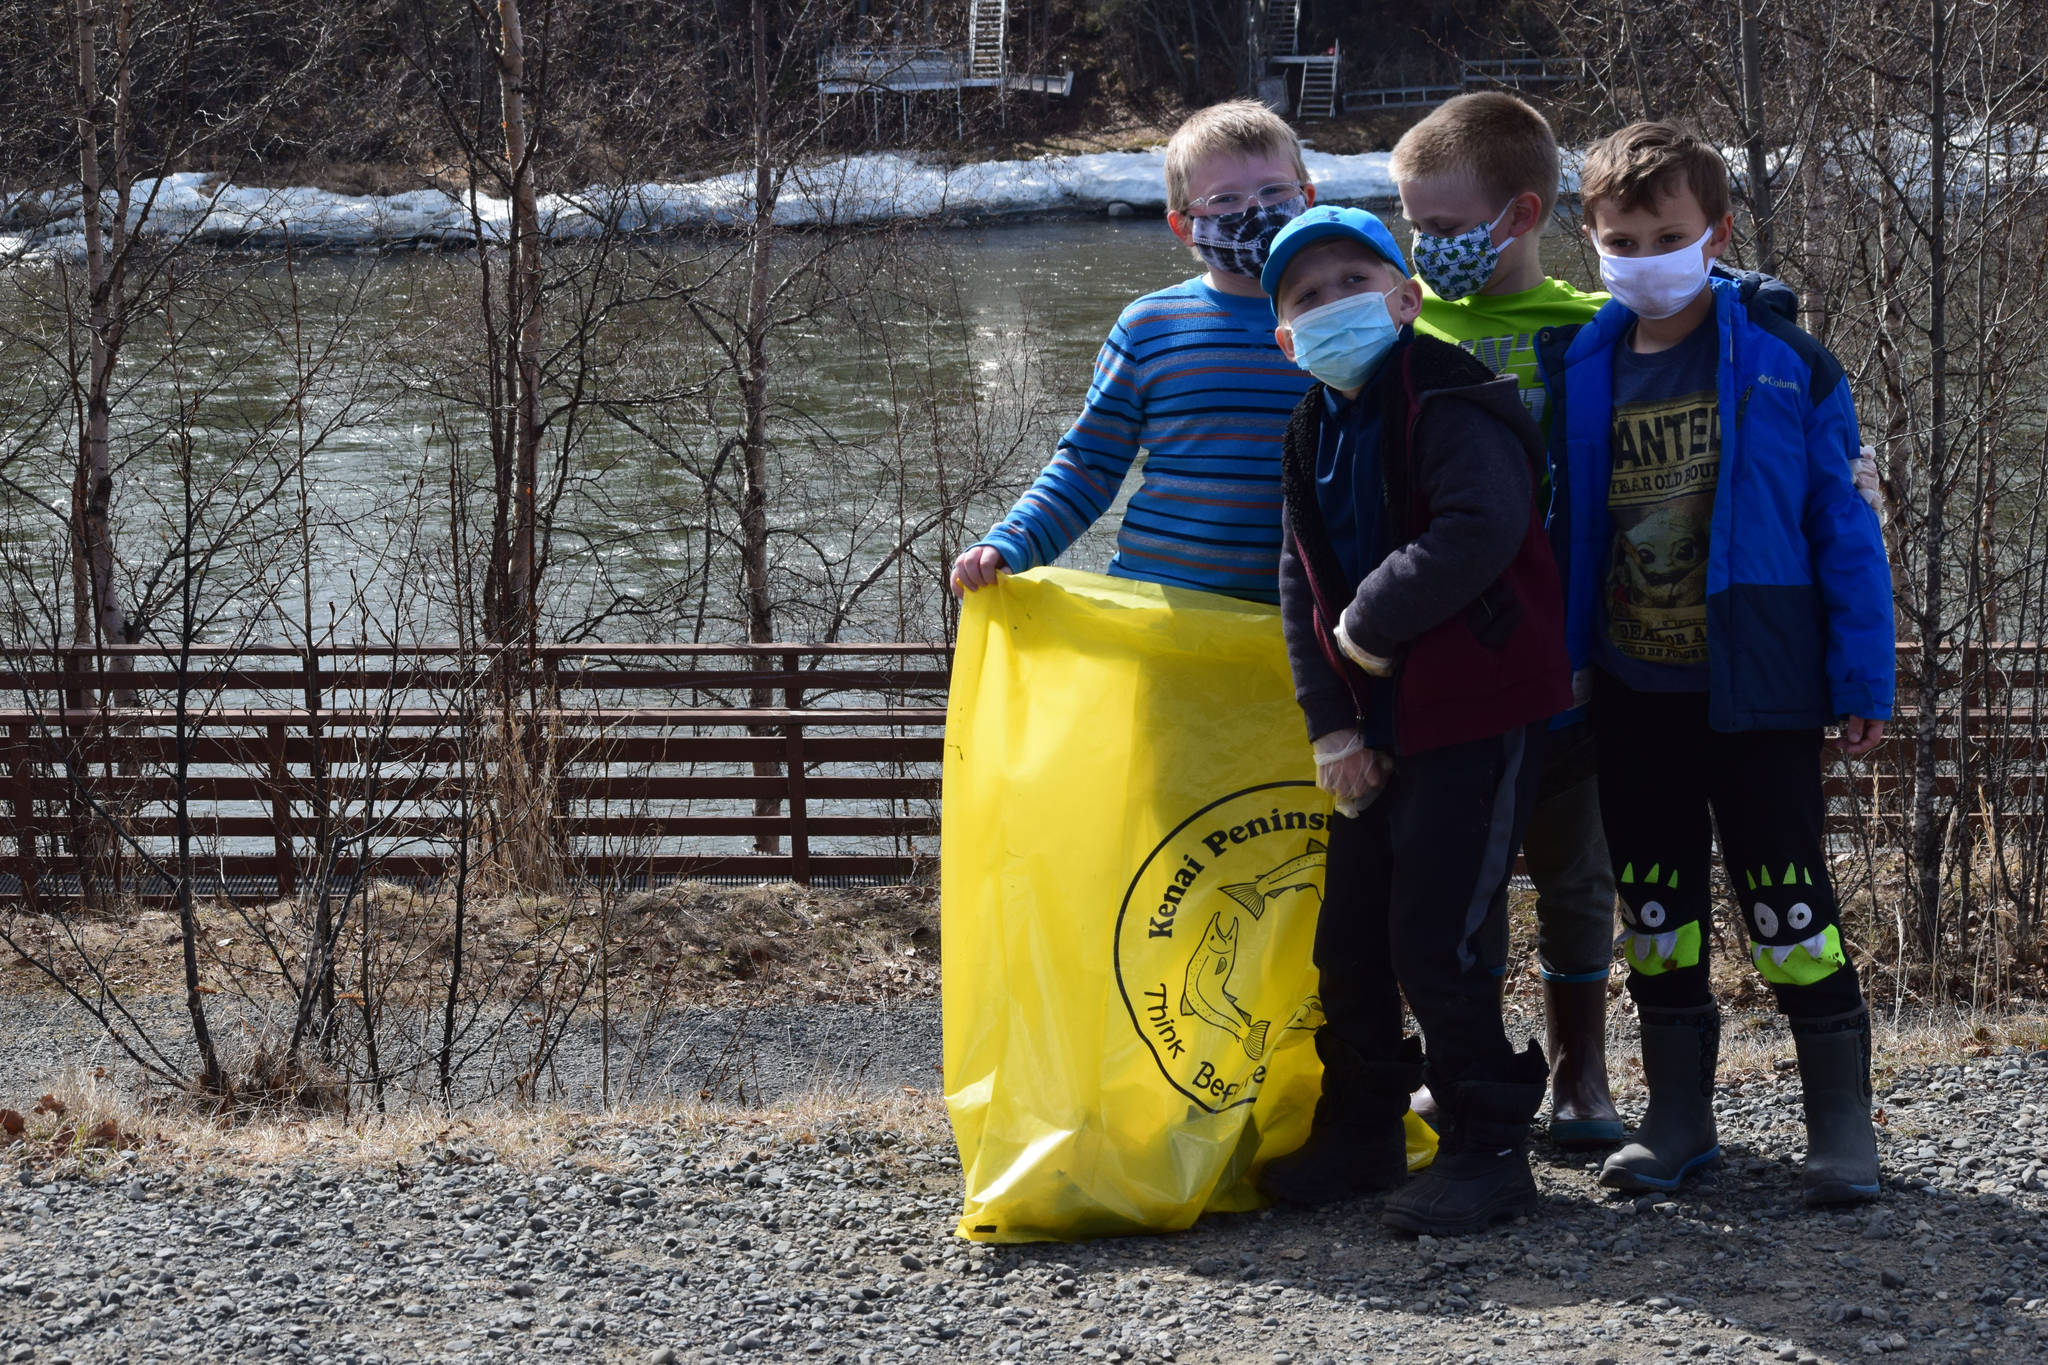 From left to right: Soldotna Montessori elementary schoolers Augie Mohr, Corbin Sulley, Nathan Nelson and Kian Jester participate in the annual Kenai River Spring Cleanup at Soldotna Creek Park in Soldotna, Alaska, on Friday, May 7, 2021. (Camille Botello / Peninsula Clarion)